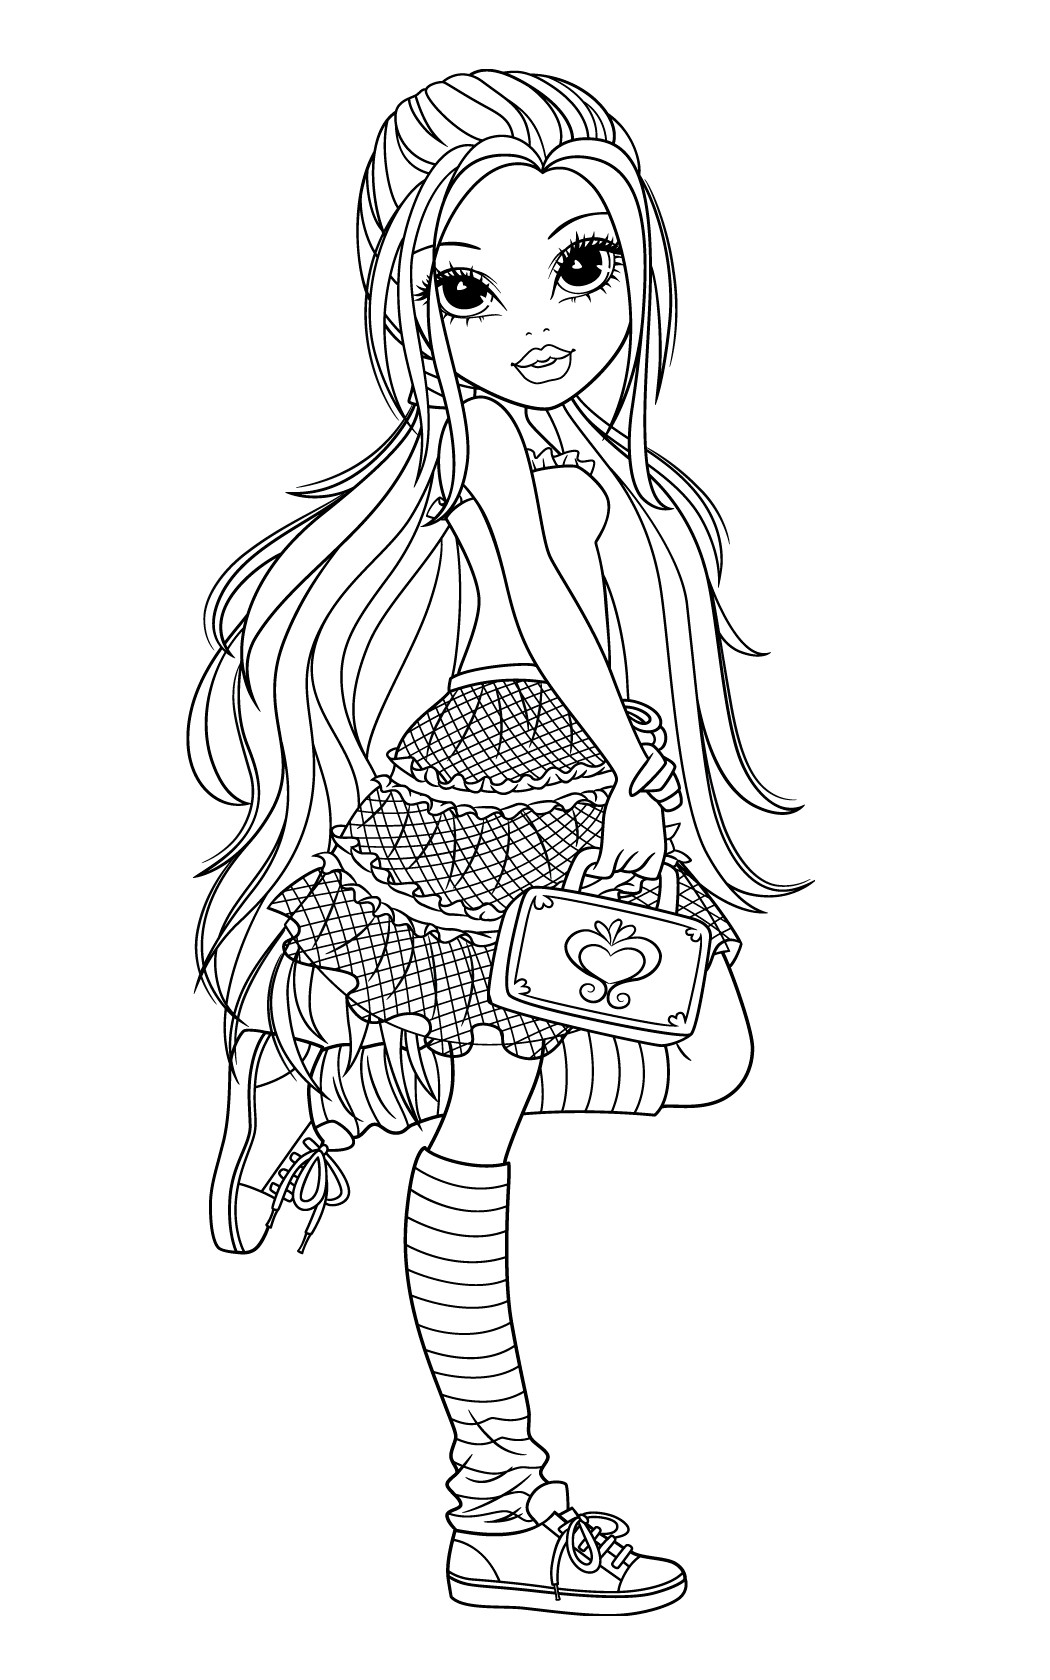 Free Girls Coloring Pages
 New Moxie Girlz Coloring Pages will be added frequently so